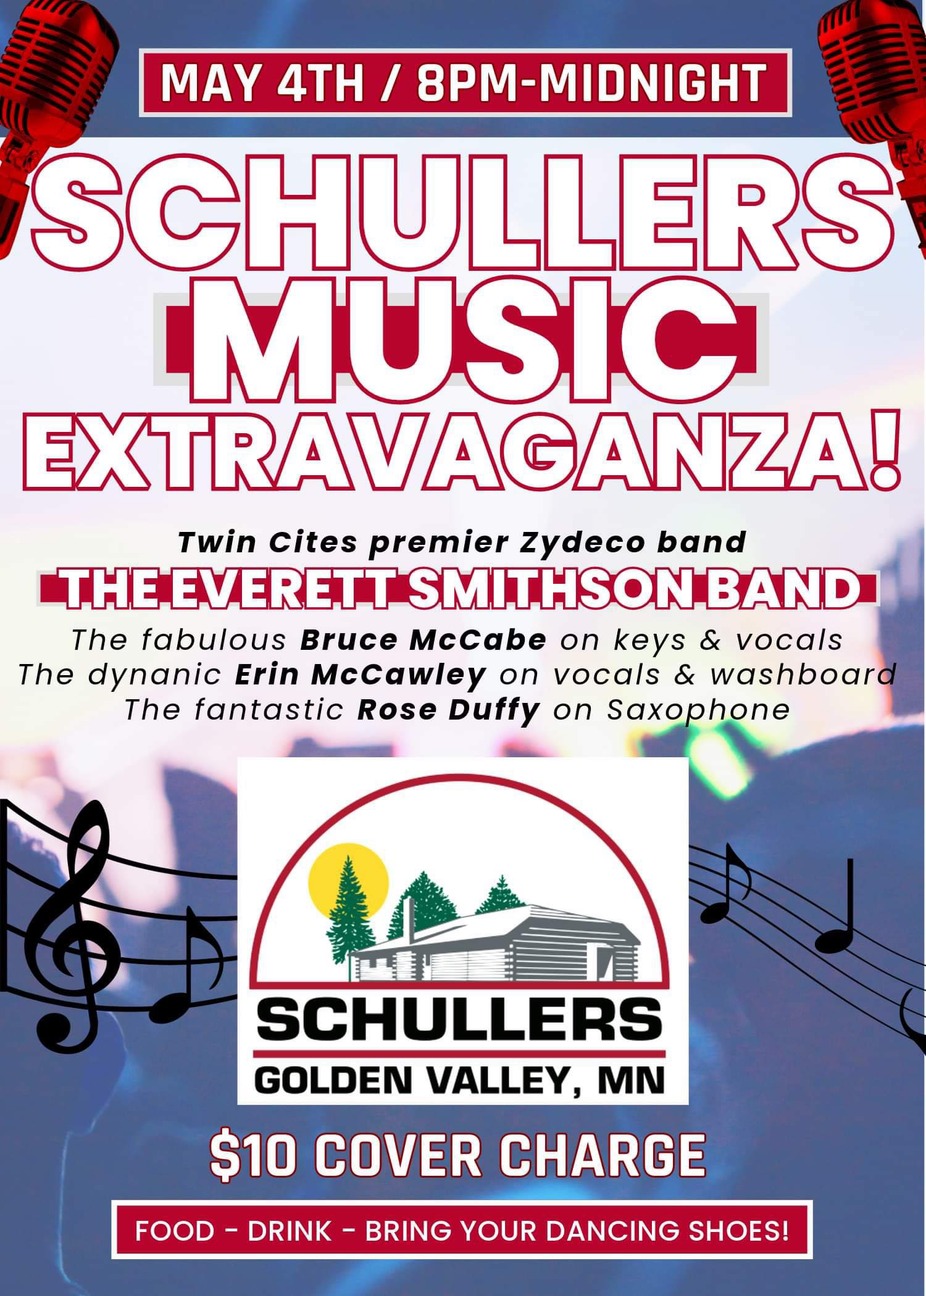 Schullers Music Extravaganza event photo